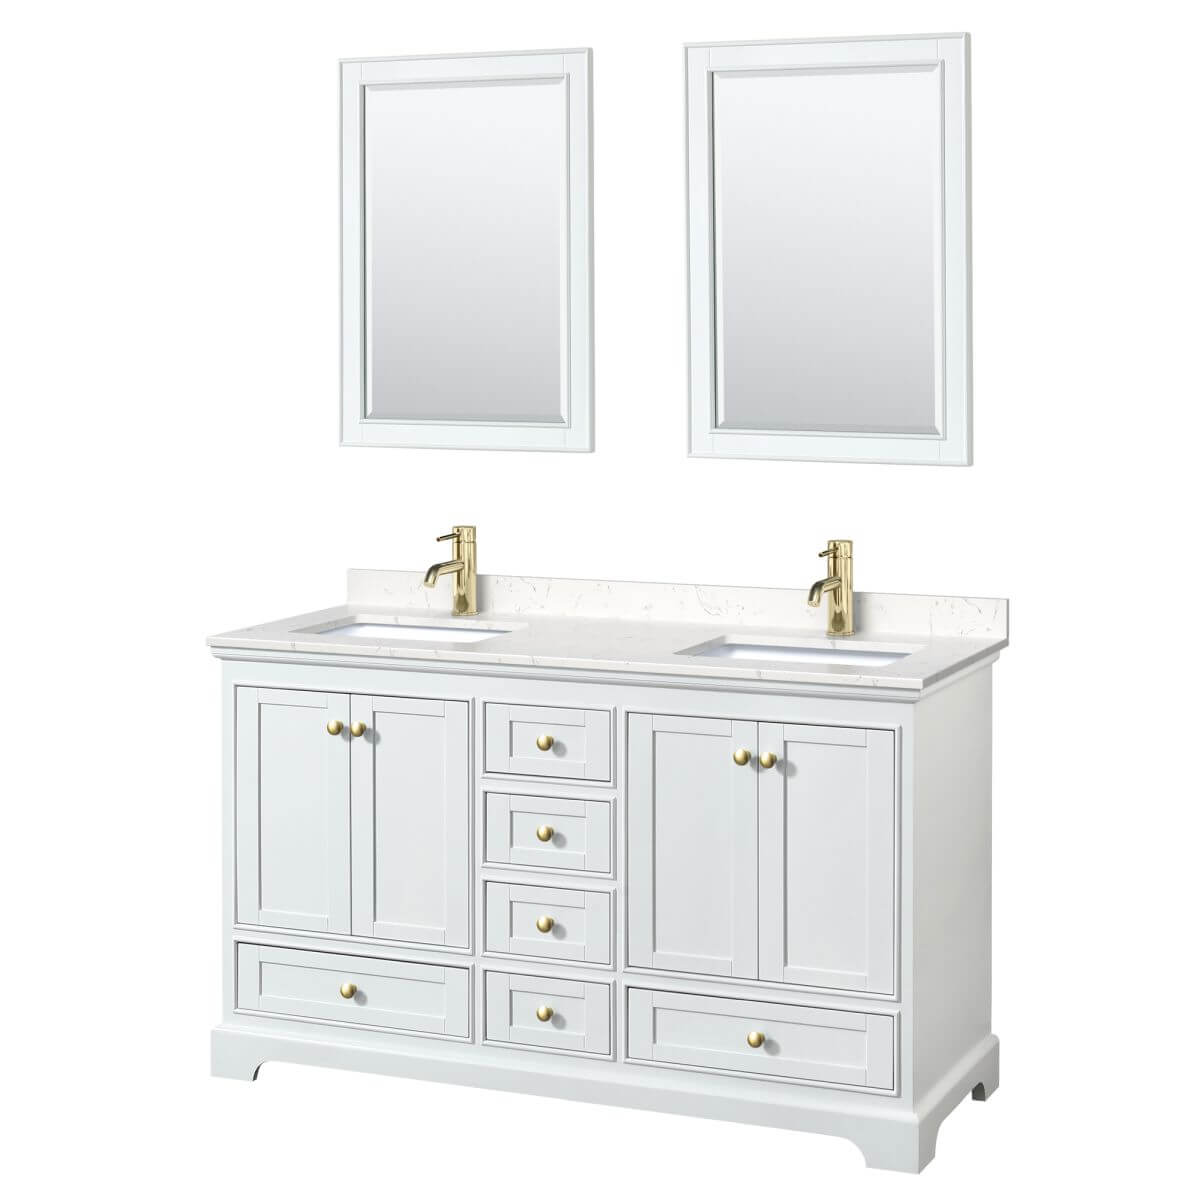 Wyndham Collection Deborah 60 inch Double Bathroom Vanity in White with Carrara Cultured Marble Countertop, Undermount Square Sinks, Brushed Gold Trim and 24 inch Mirrors - WCS202060DWGC2UNSM24